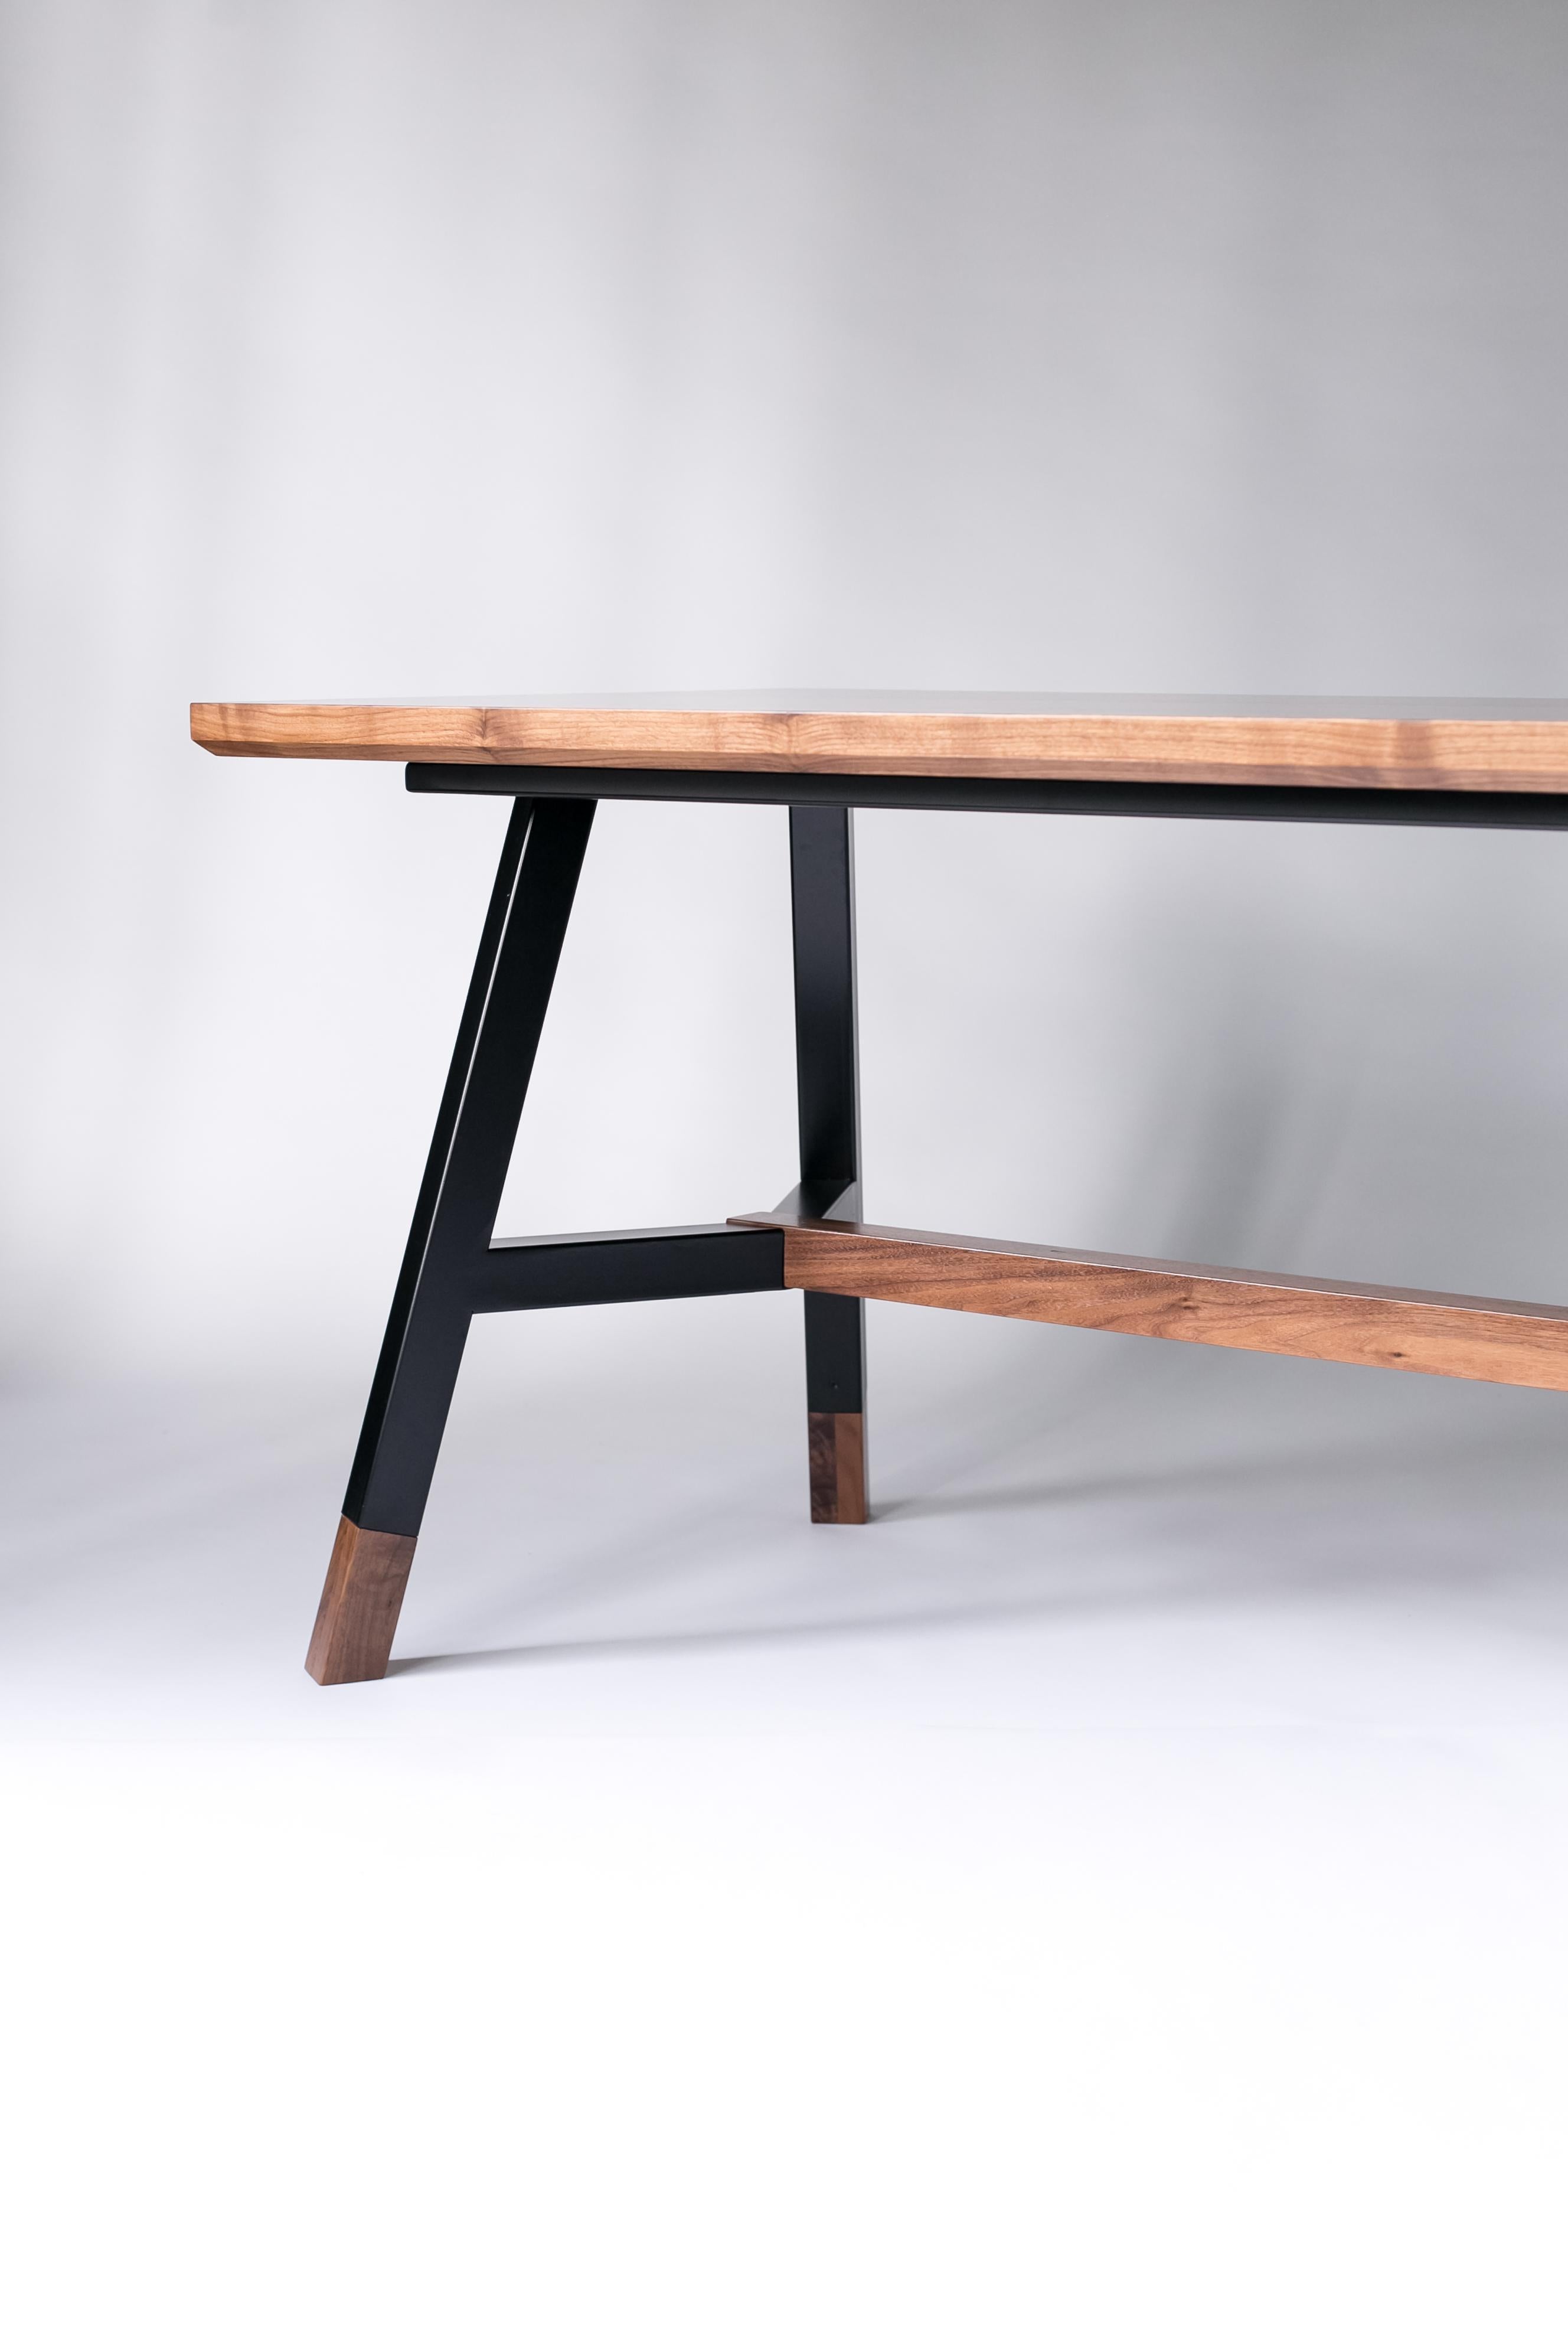 Metal A-Frame, Modern Walnut and Black Powder Coated Steel Dining Table